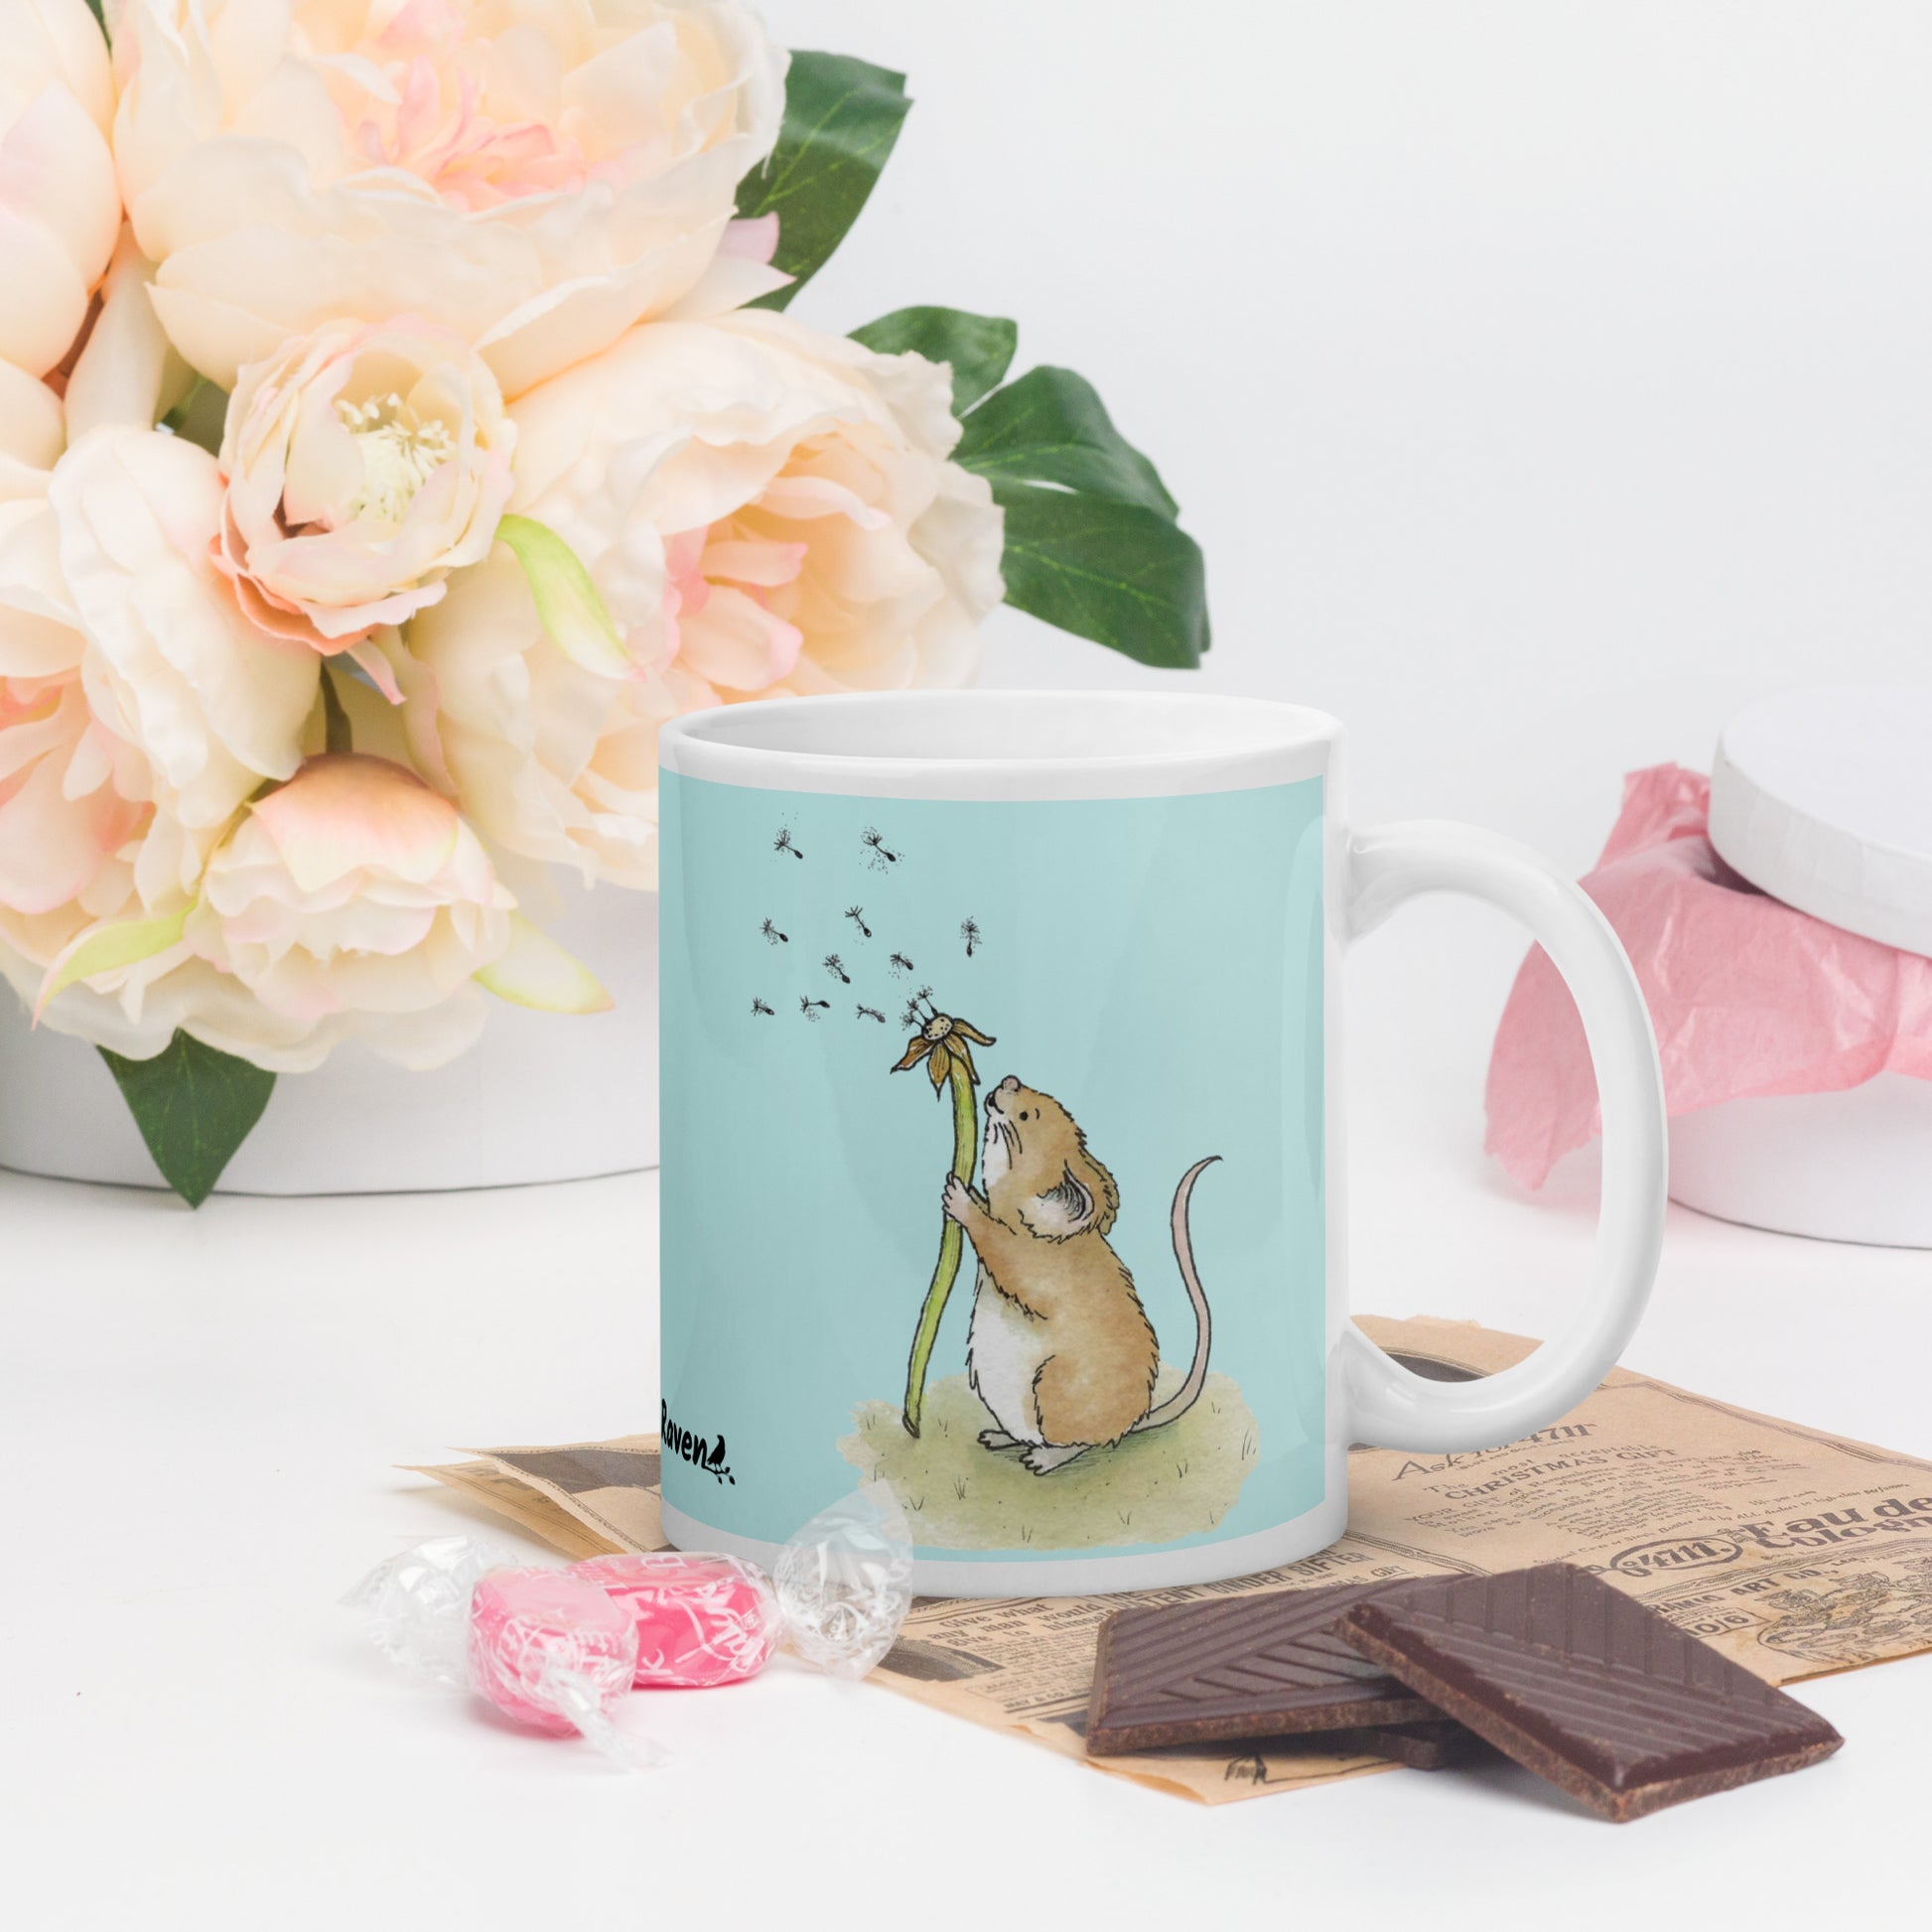 Two-sided image of original Dandelion wish design of cute watercolor mouse blowing dandelion seeds  featured on 11 ounce mug with light blue background. On table with flowers and chocolate.